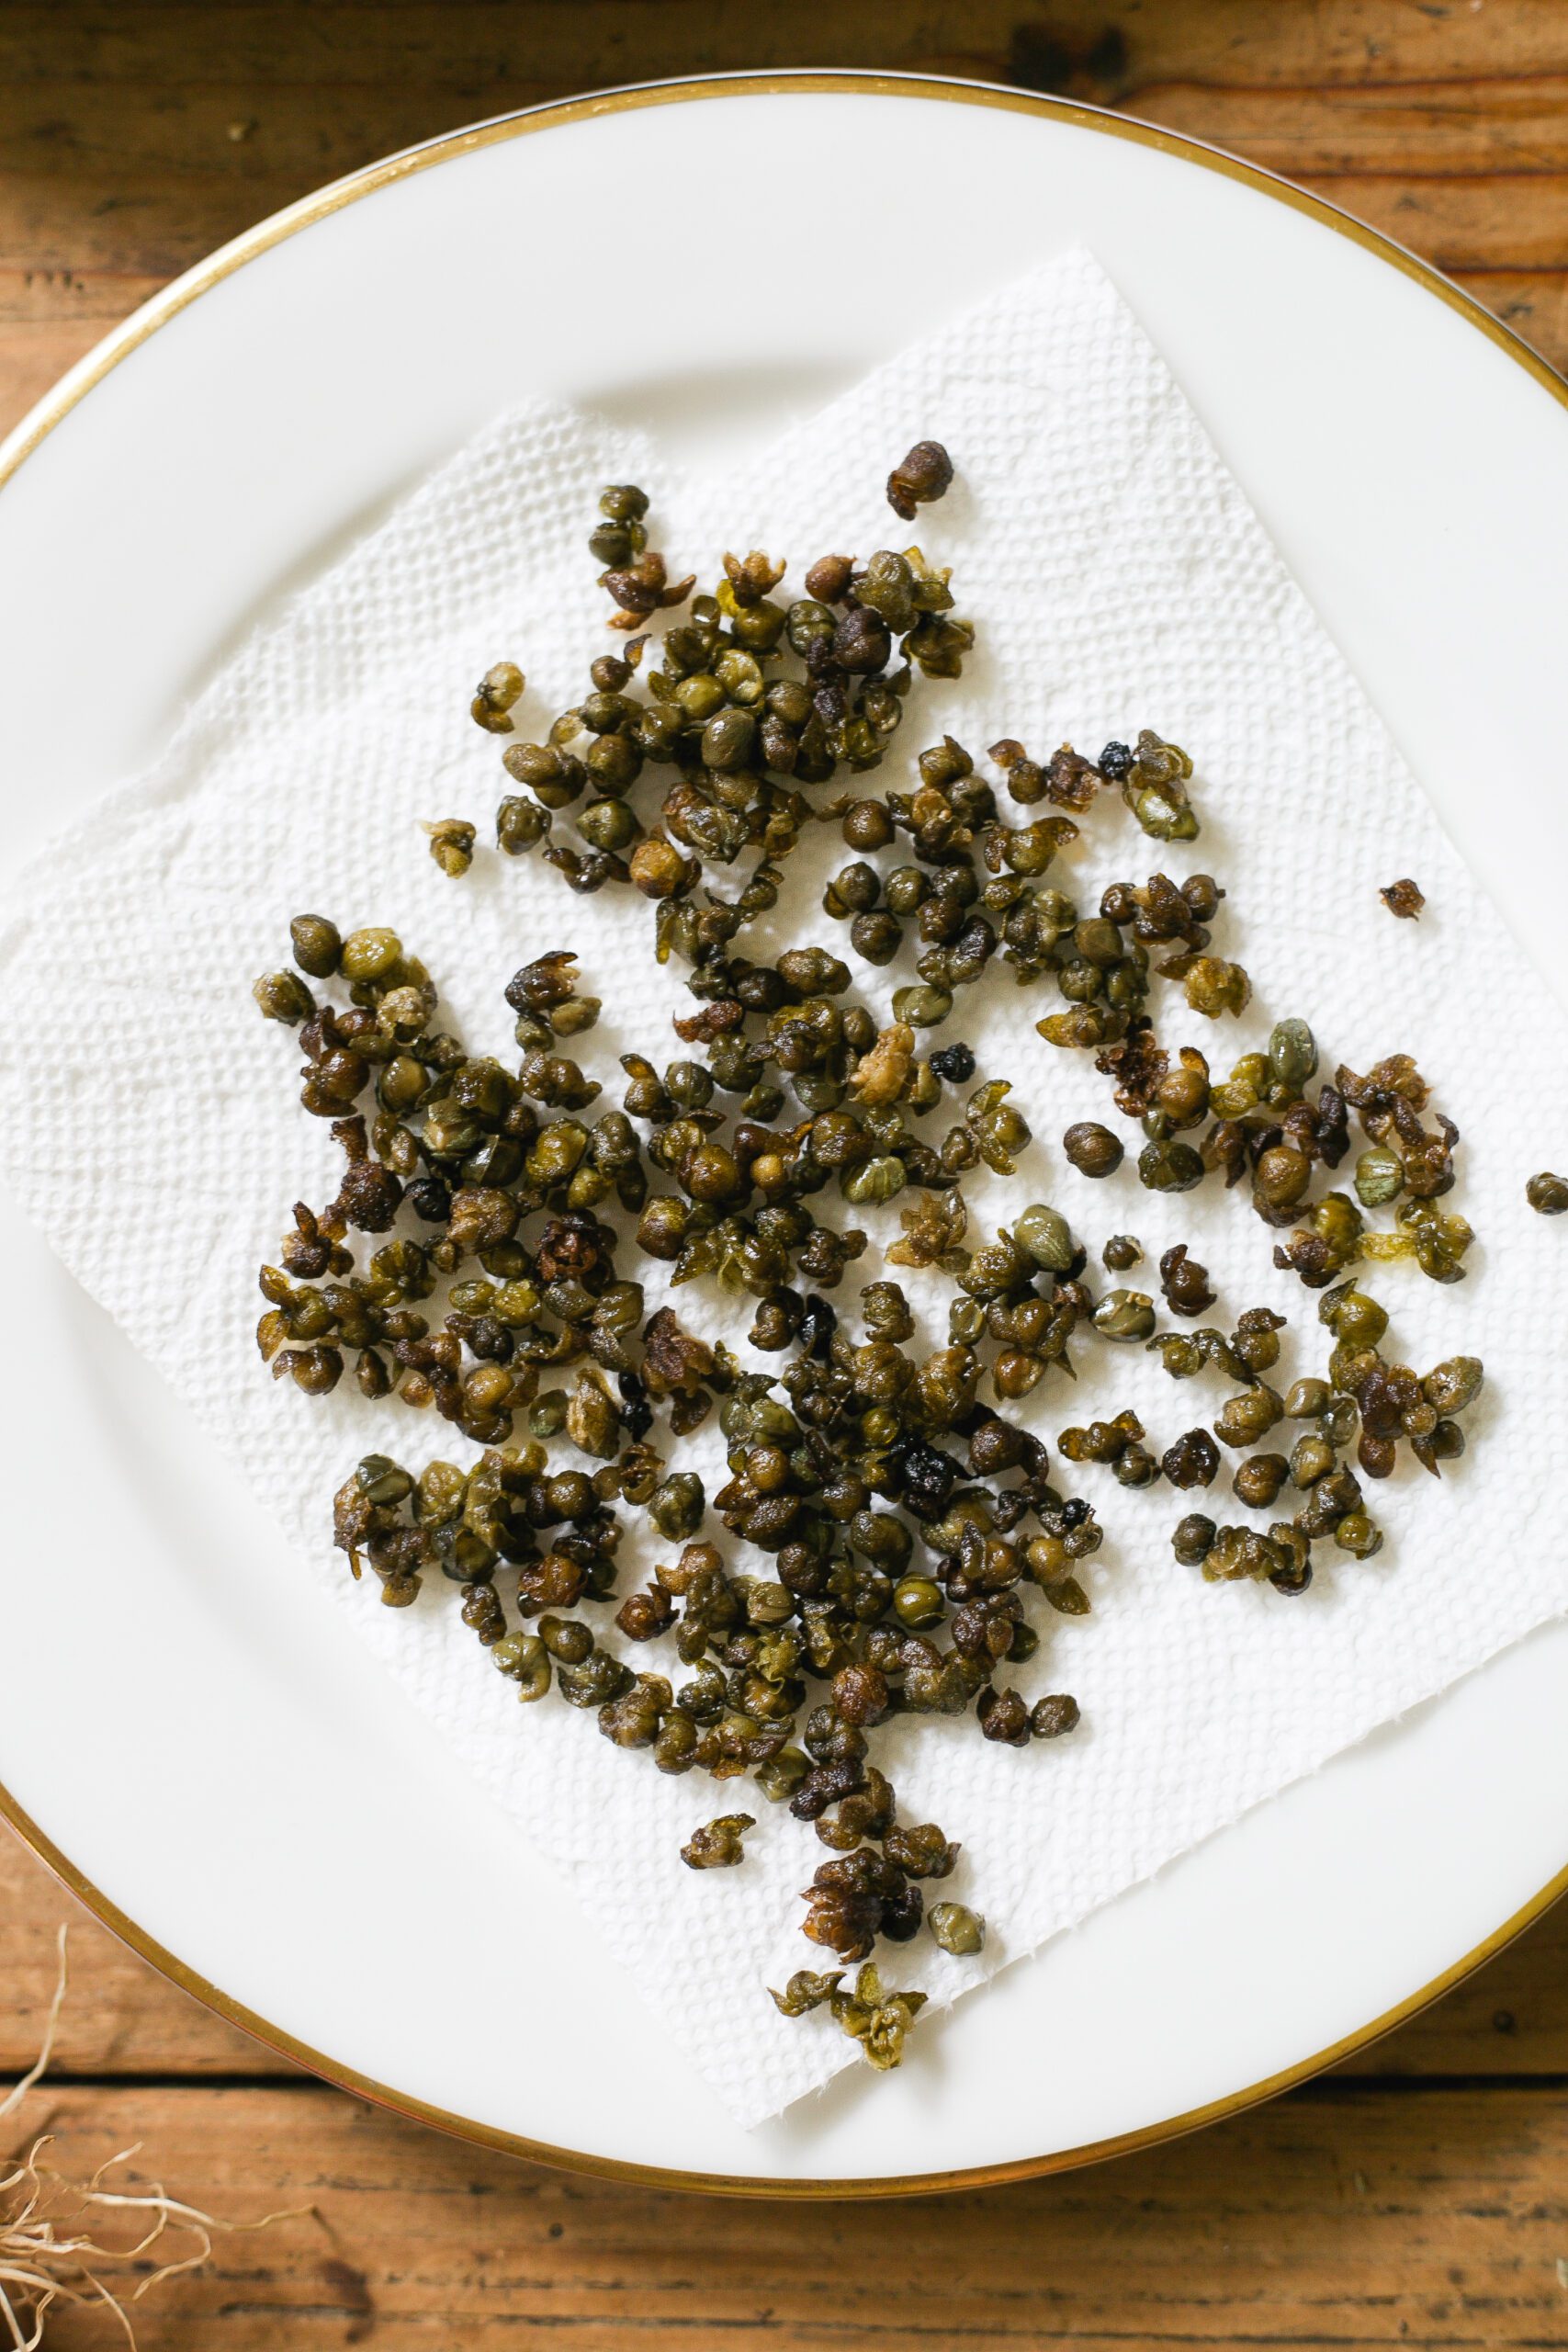 Crispy fried capers on a plate